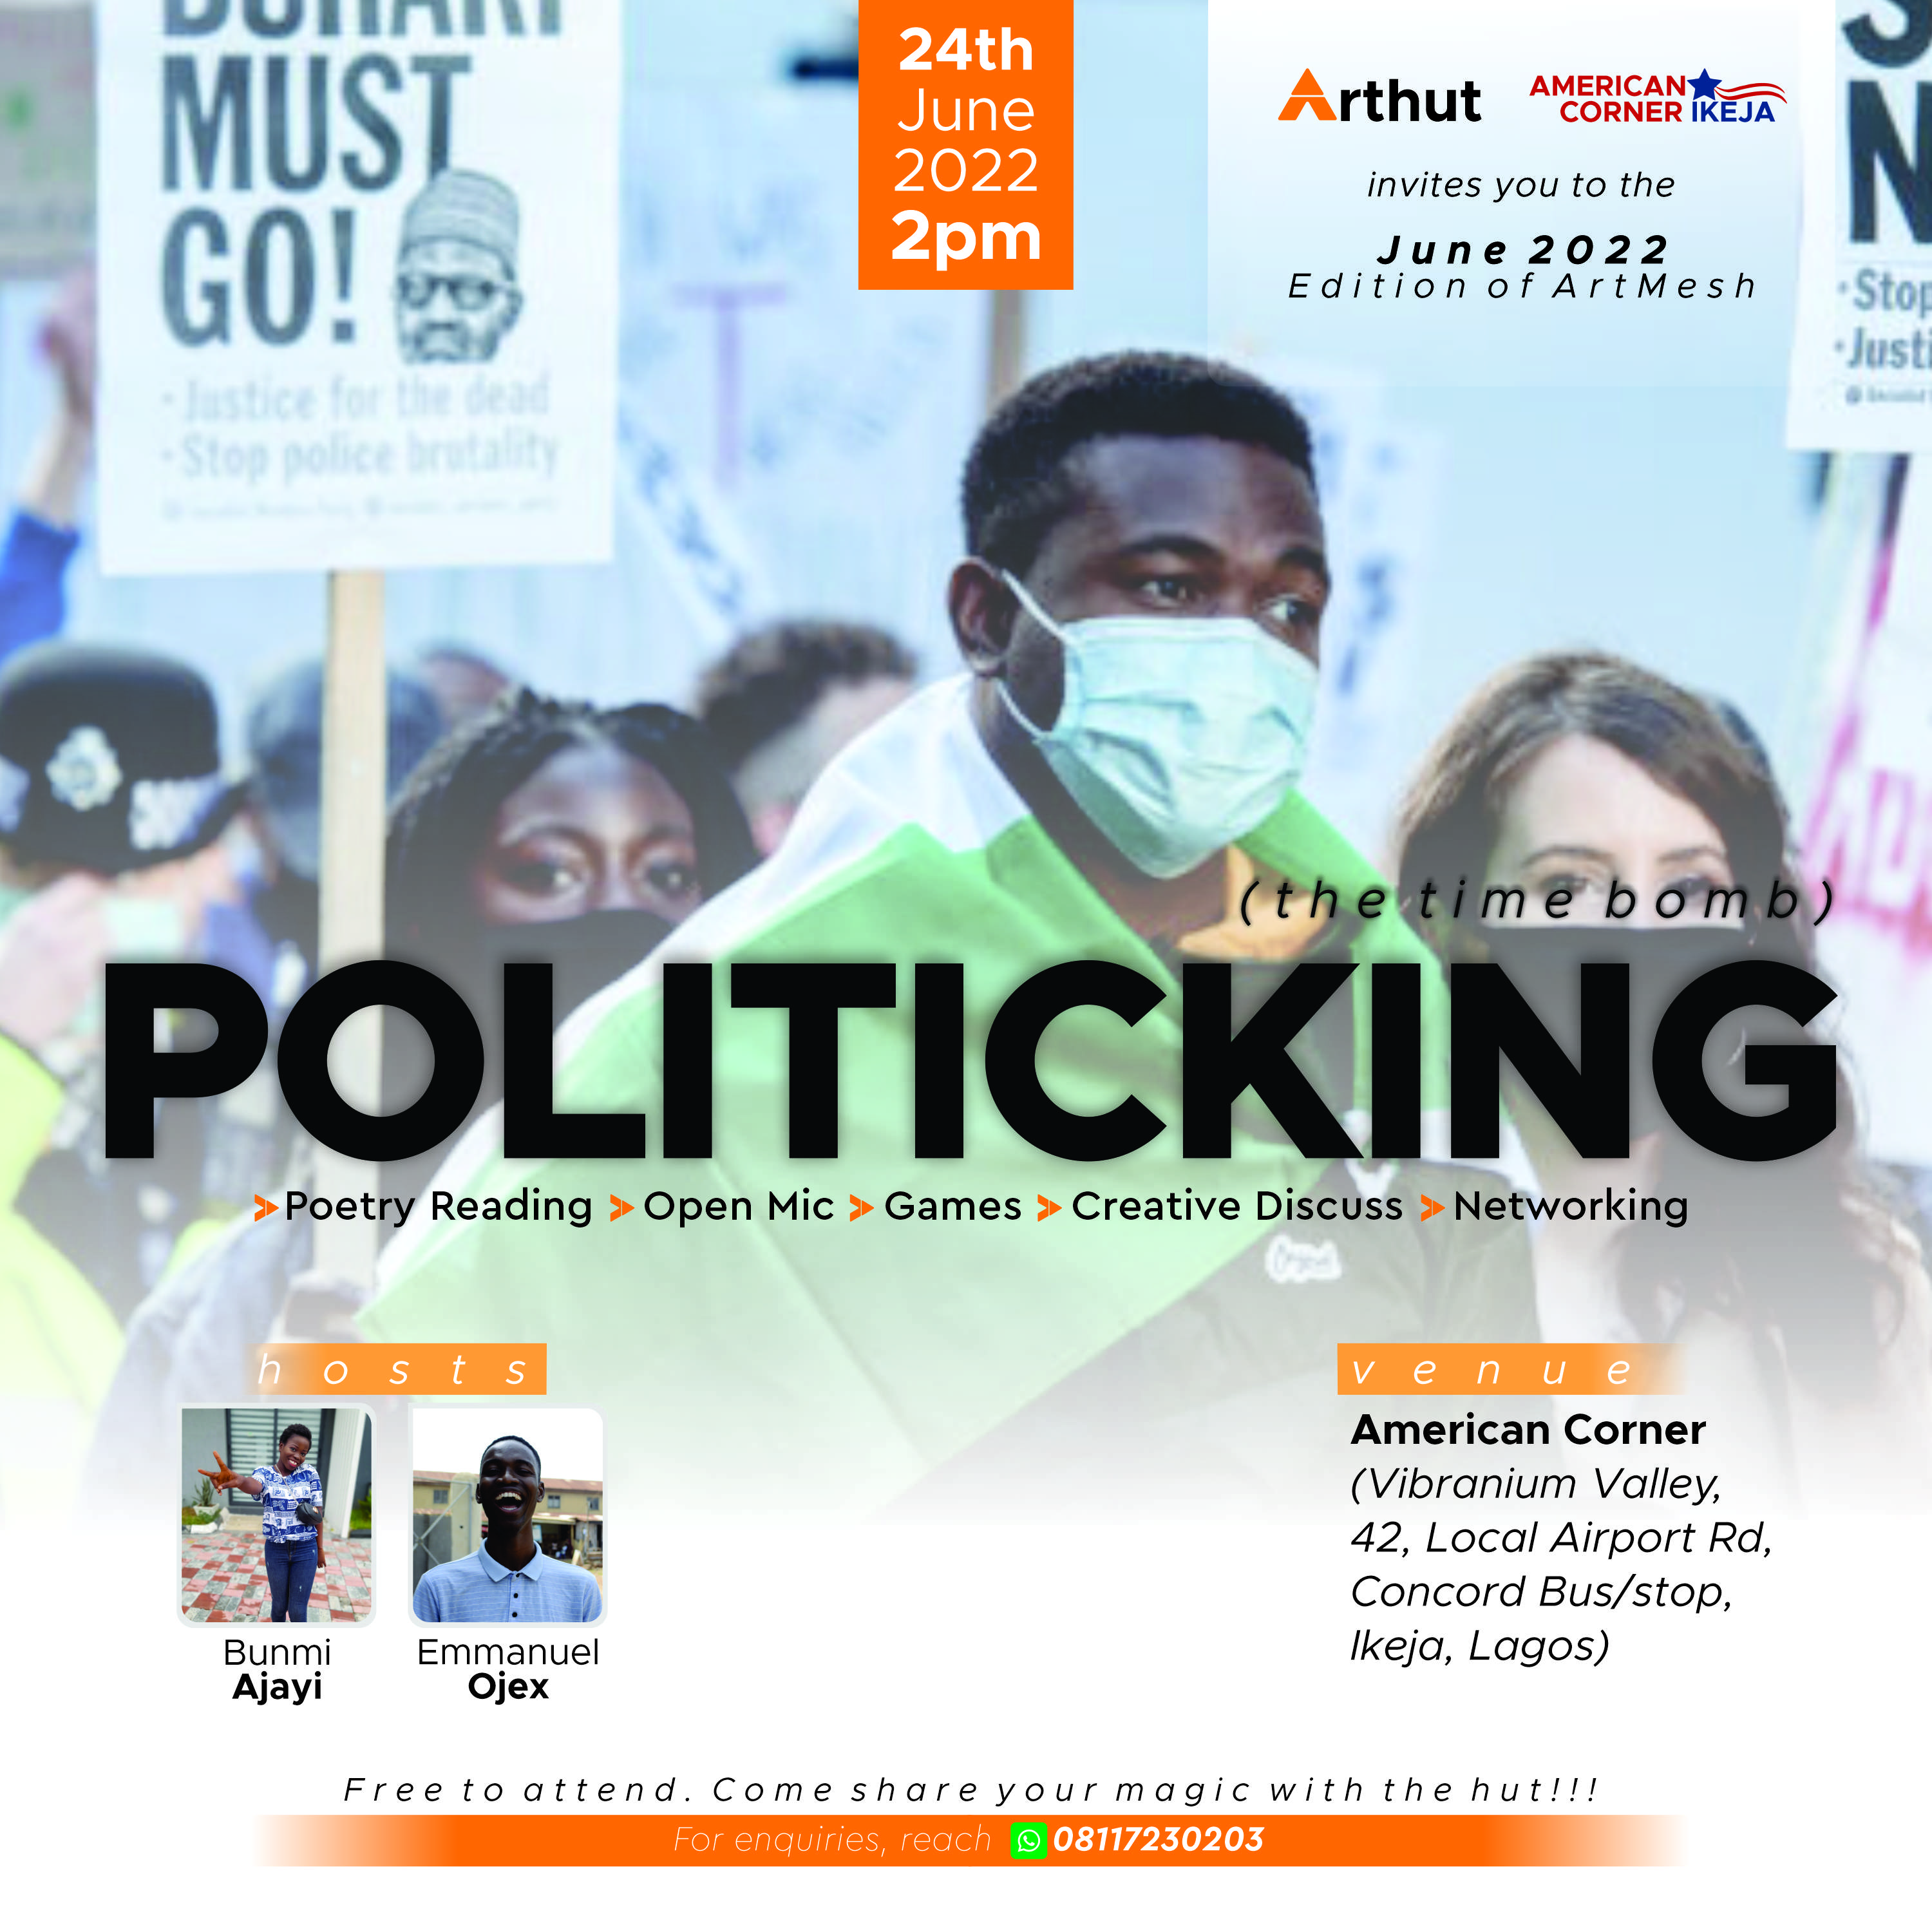 POLITICKING - ArtMesh (OpenMic) Lagos - June 2022 Edition Post free event in Nigeria using tickethub.ng, buy and sell tickets to event